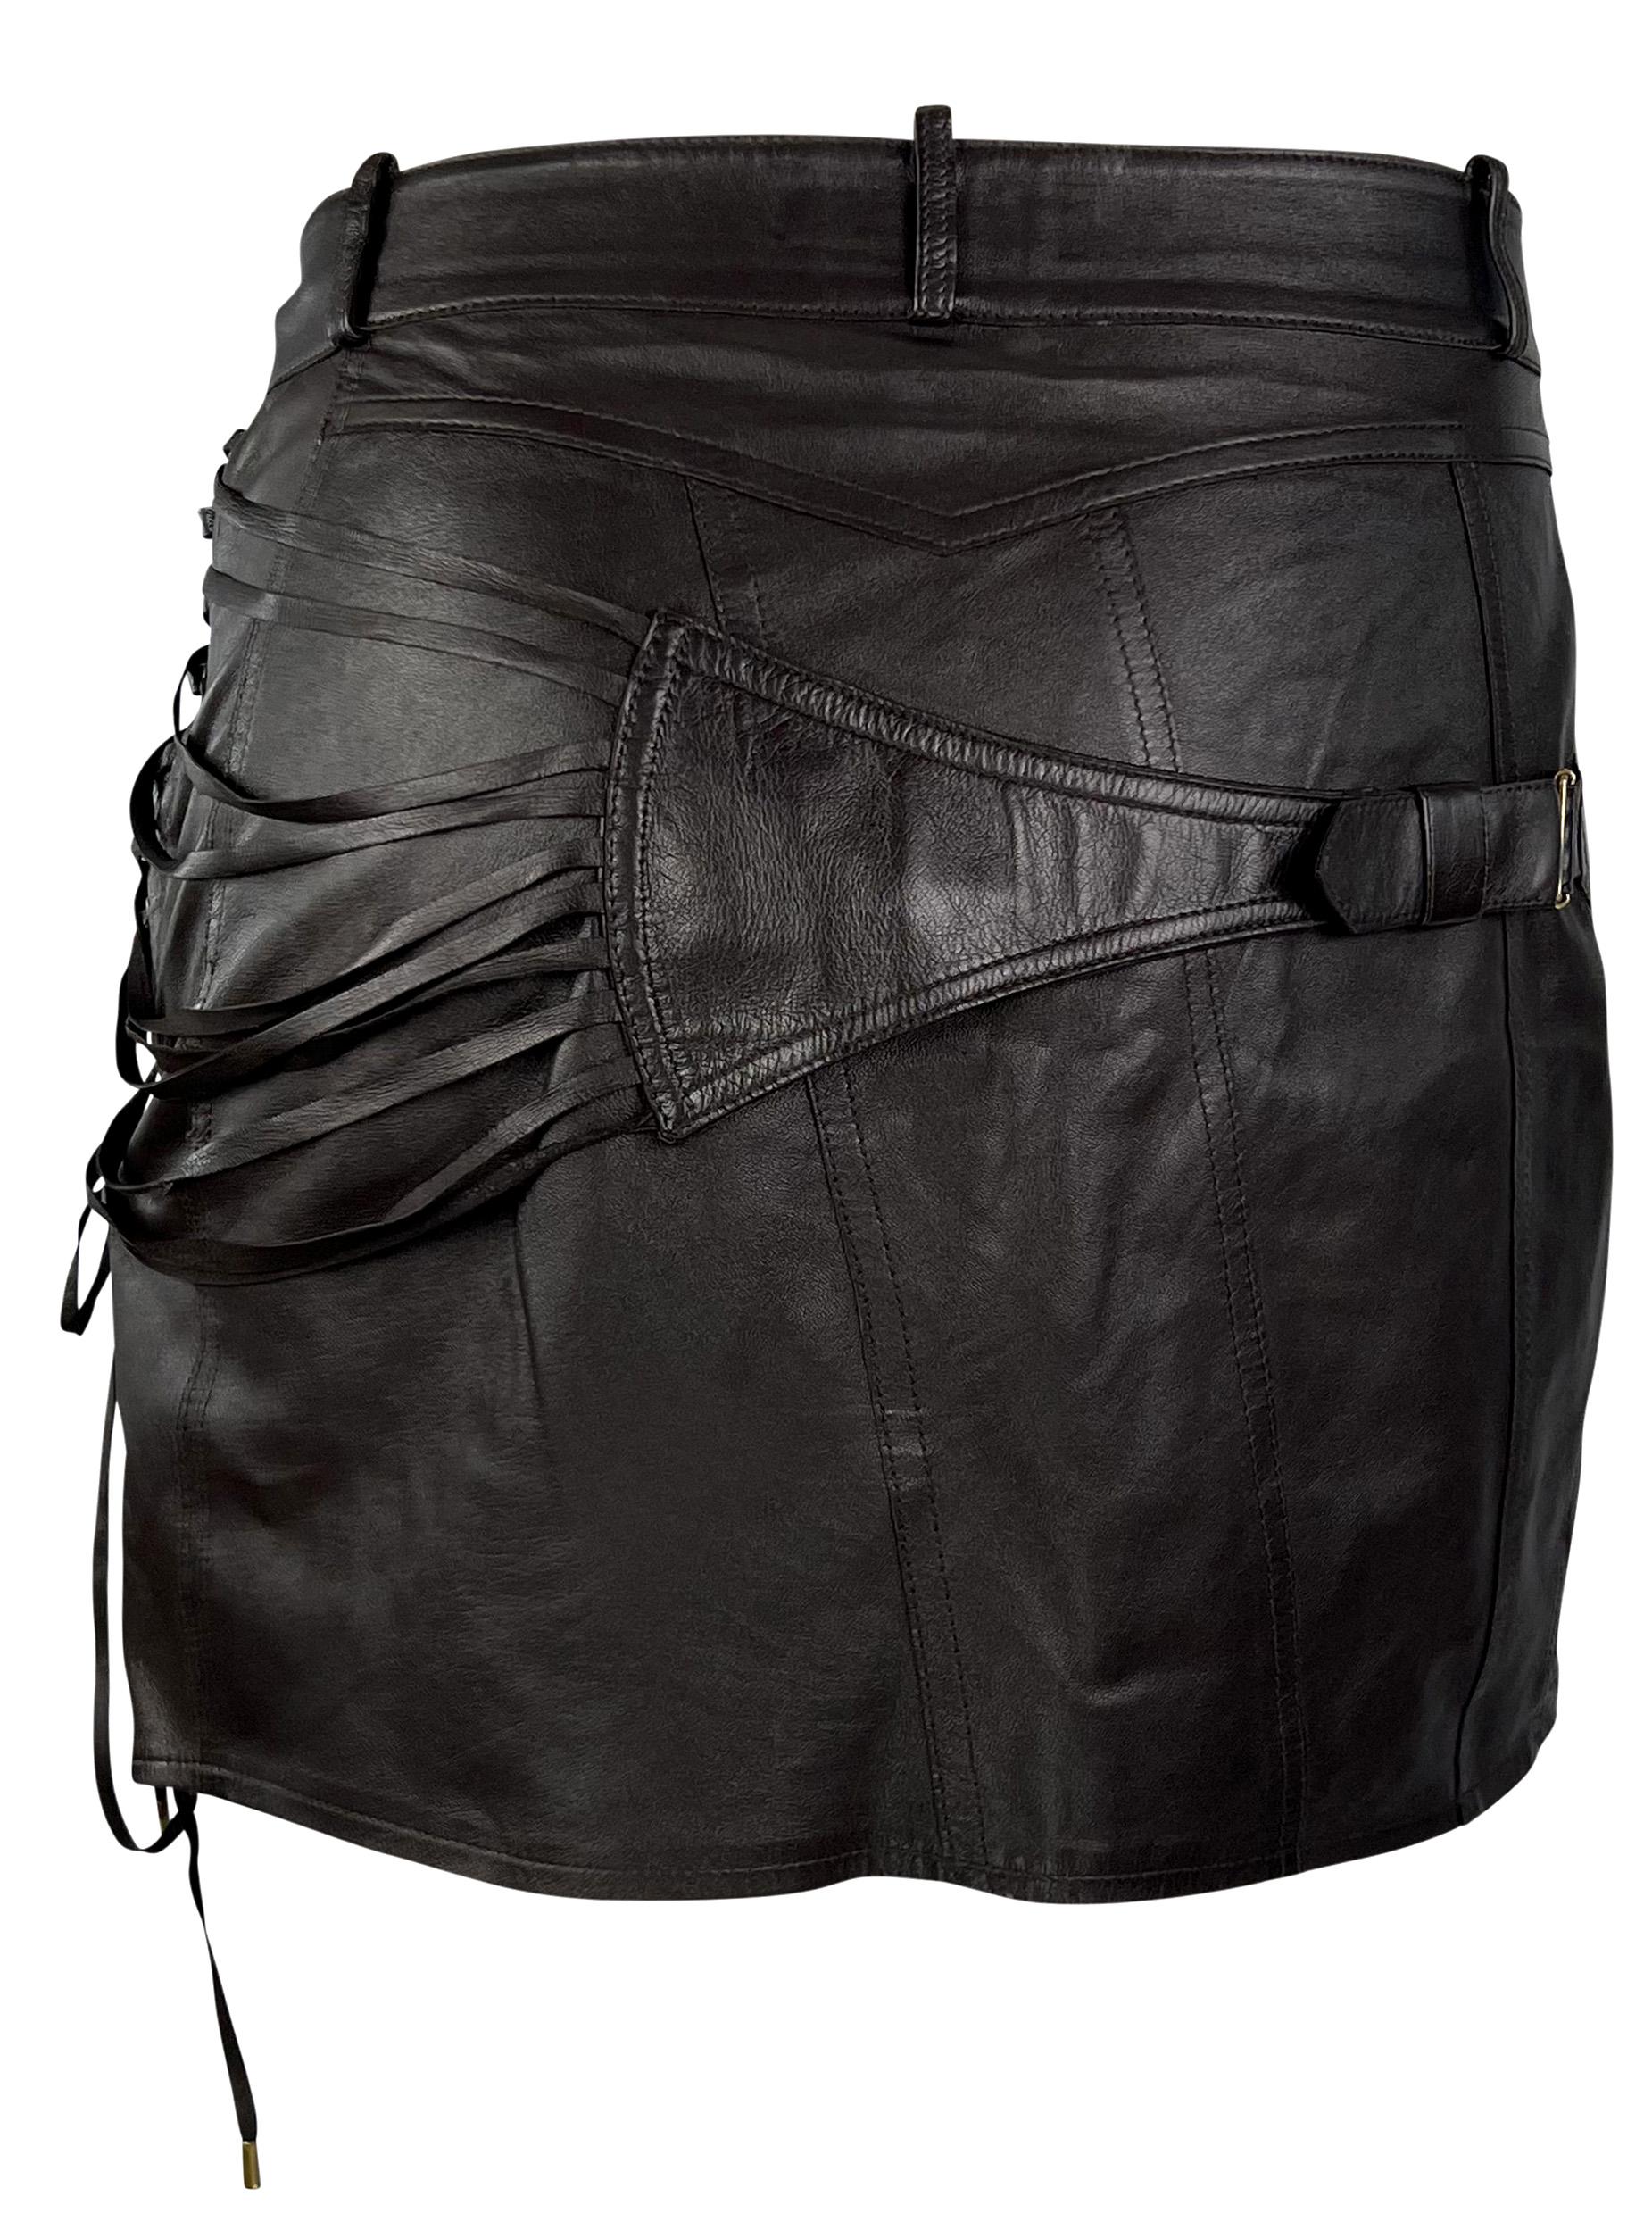 F/W 2002 Christian Dior by John Galliano Leather Lace-Up Asymmetric Mini Skirt For Sale 4